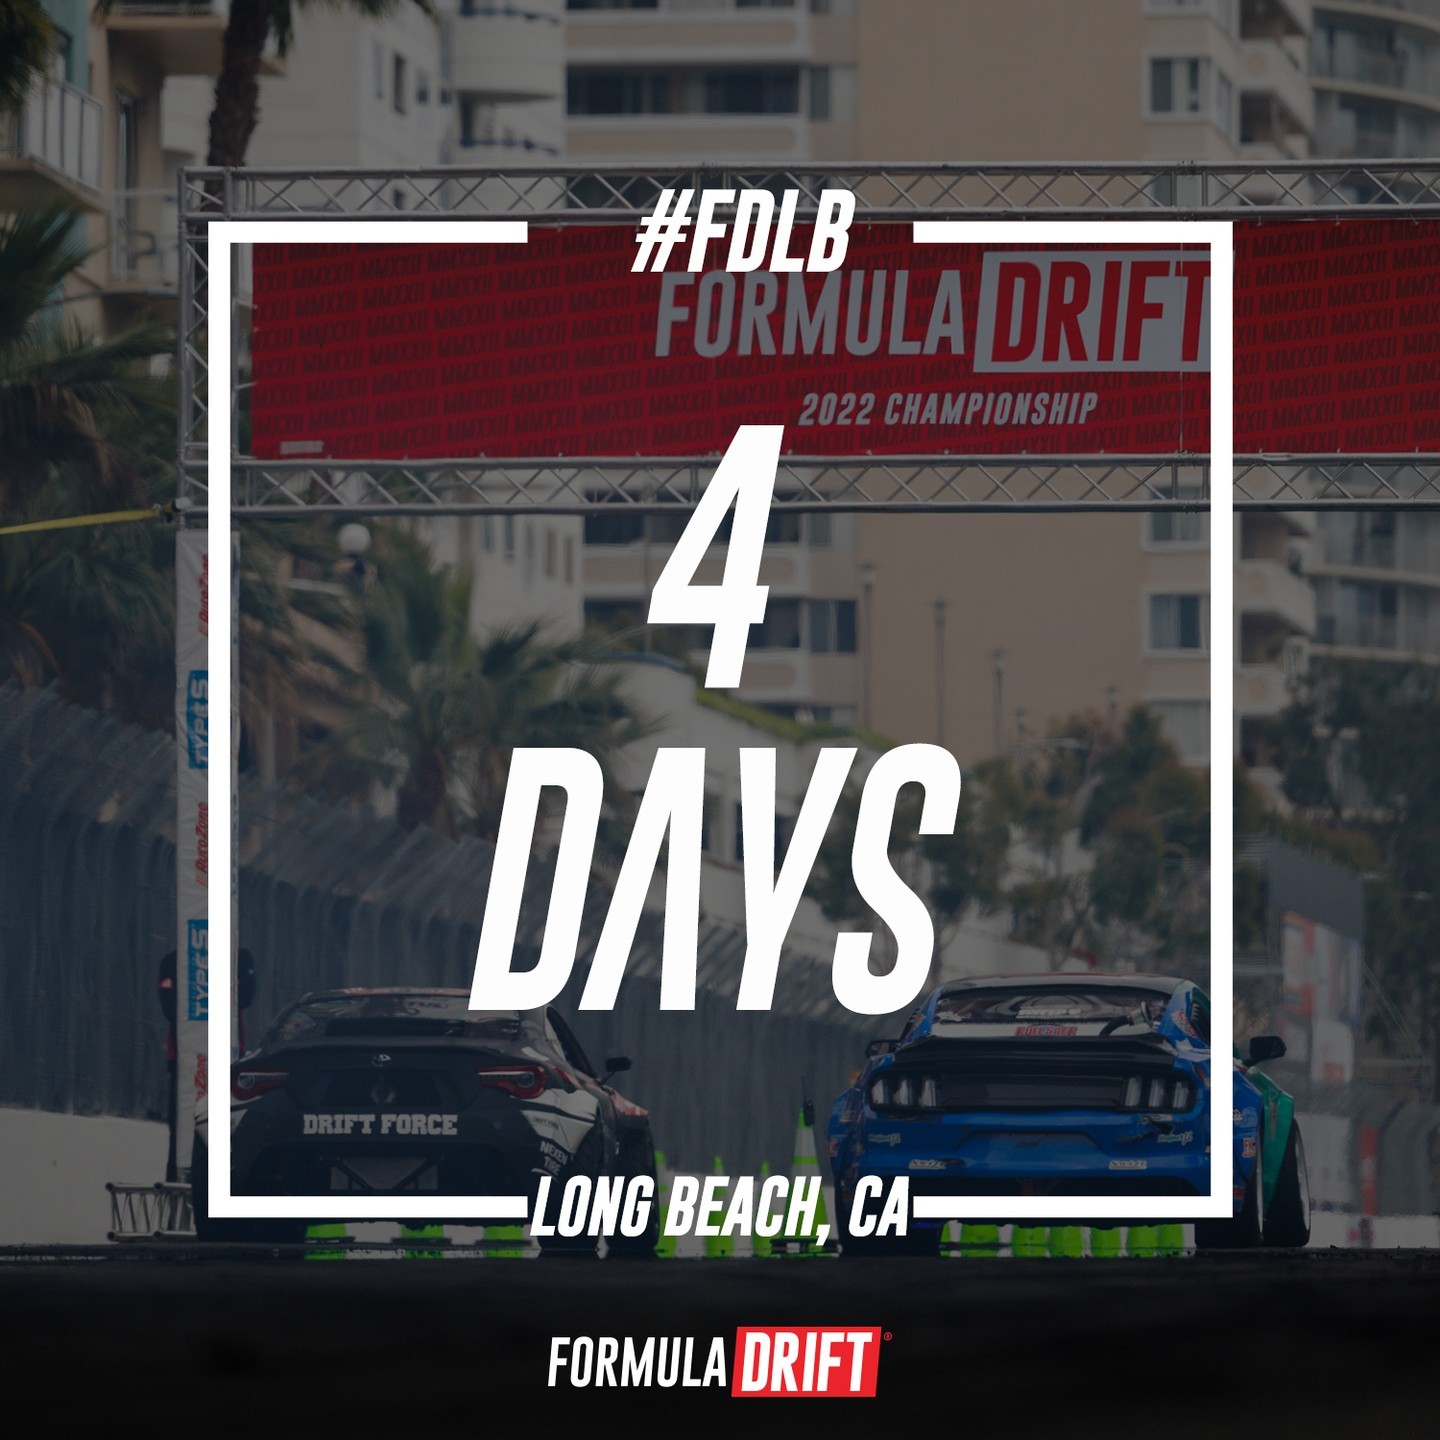 We are back THIS WEEK! 4 days and 4 hours to be exact! 
Tickets available now to The @AutoZone Streets of Long Beach Presented by @TypeSAuto THIS FRIDAY - SATURDAY: (link in bio)